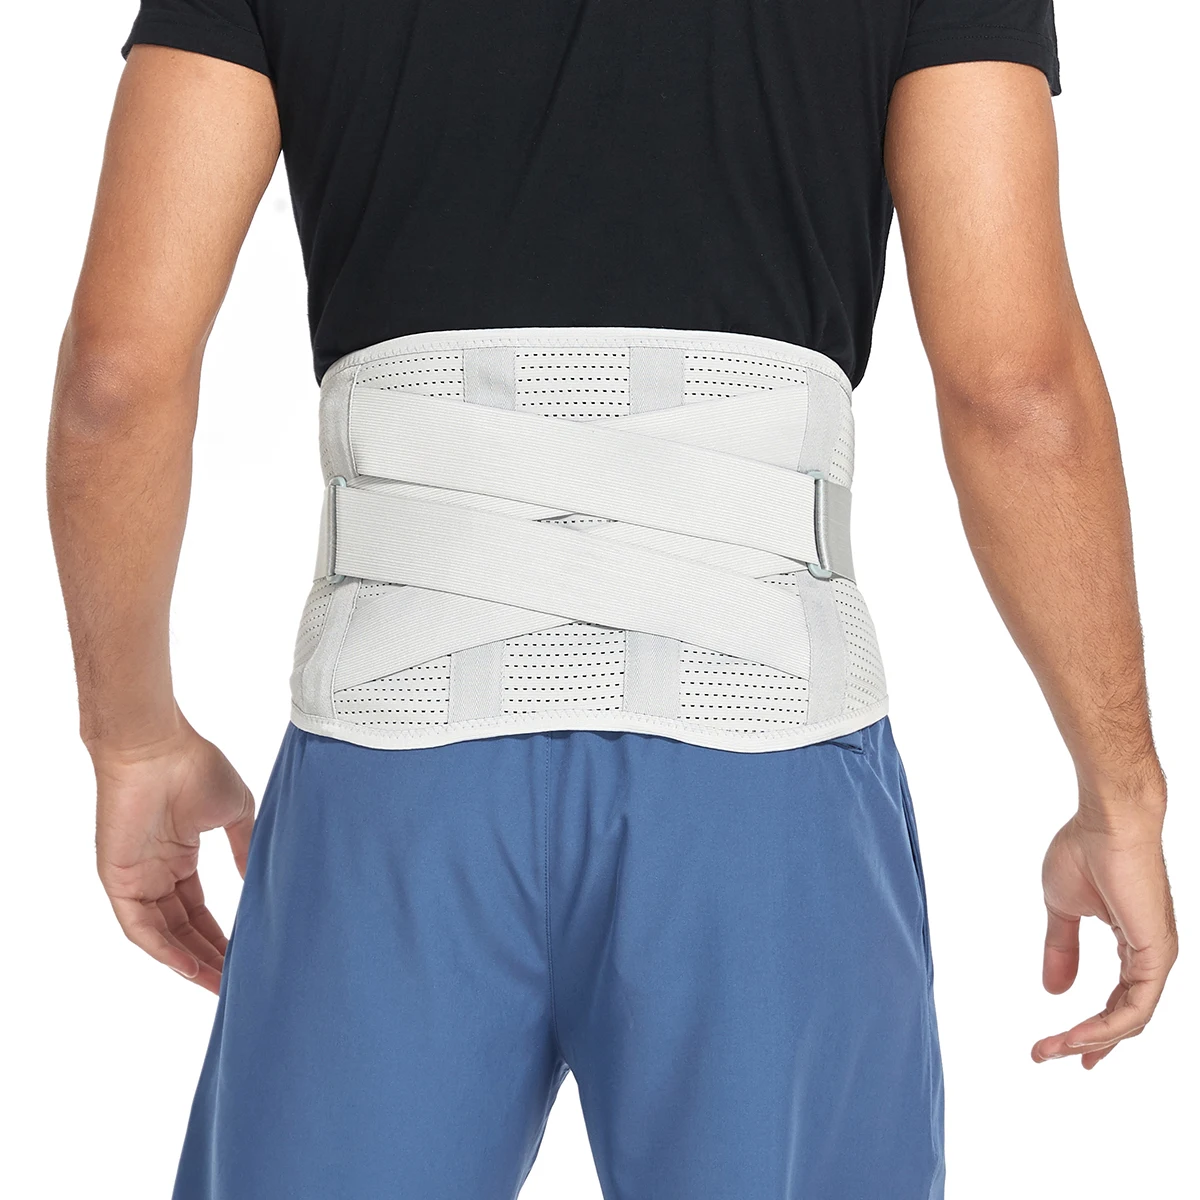 Back Brace for Men Breathable Waist Shapers Lumbar Lower Back Support Belt Herniated Disc Back Pain Relief Heavy Lifting